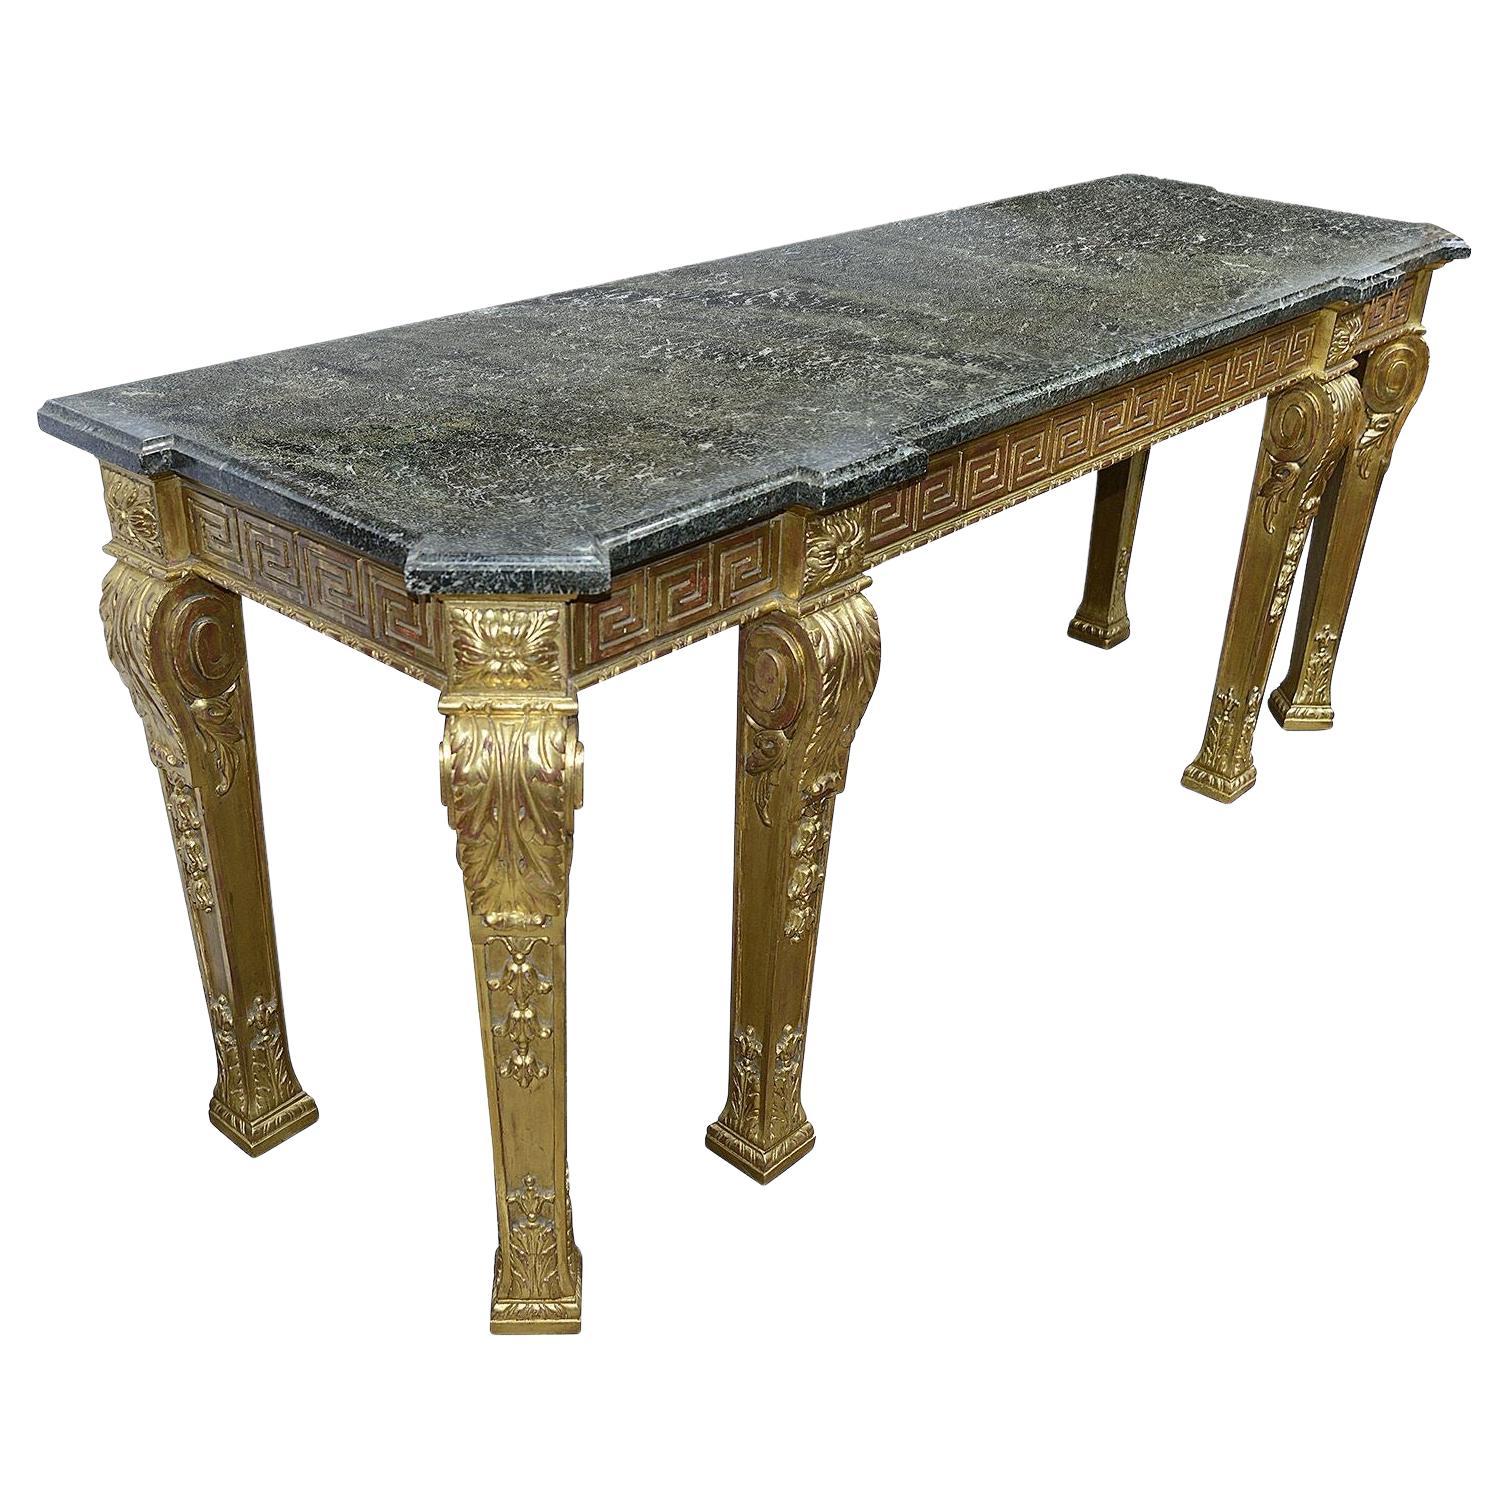 Adam Influenced Carved Giltwood Console Table, by Charles Tozer, London